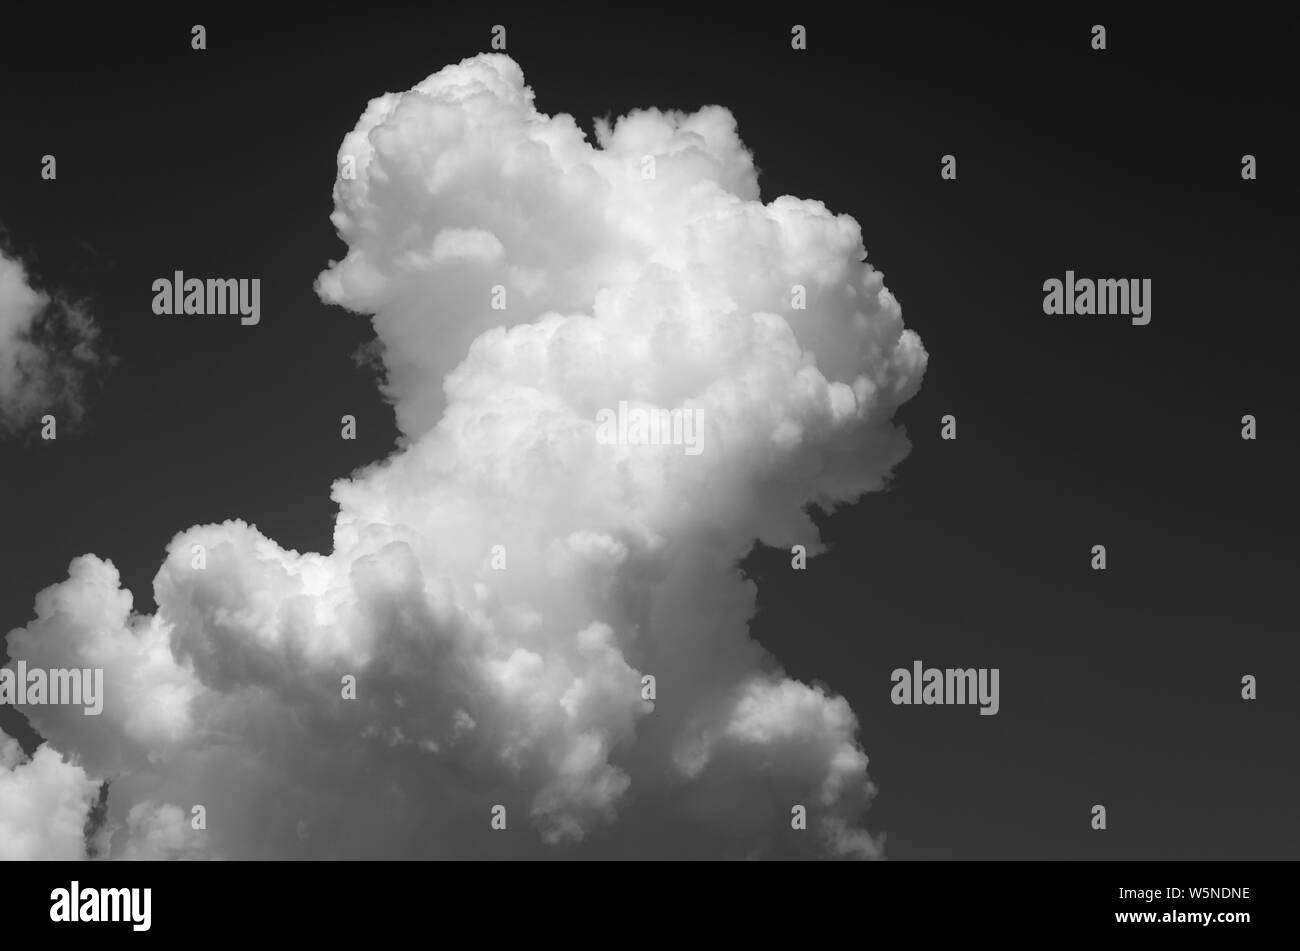 Black and White Image of a Big Cell of Cumulonimbus Cloud. Stock Photo